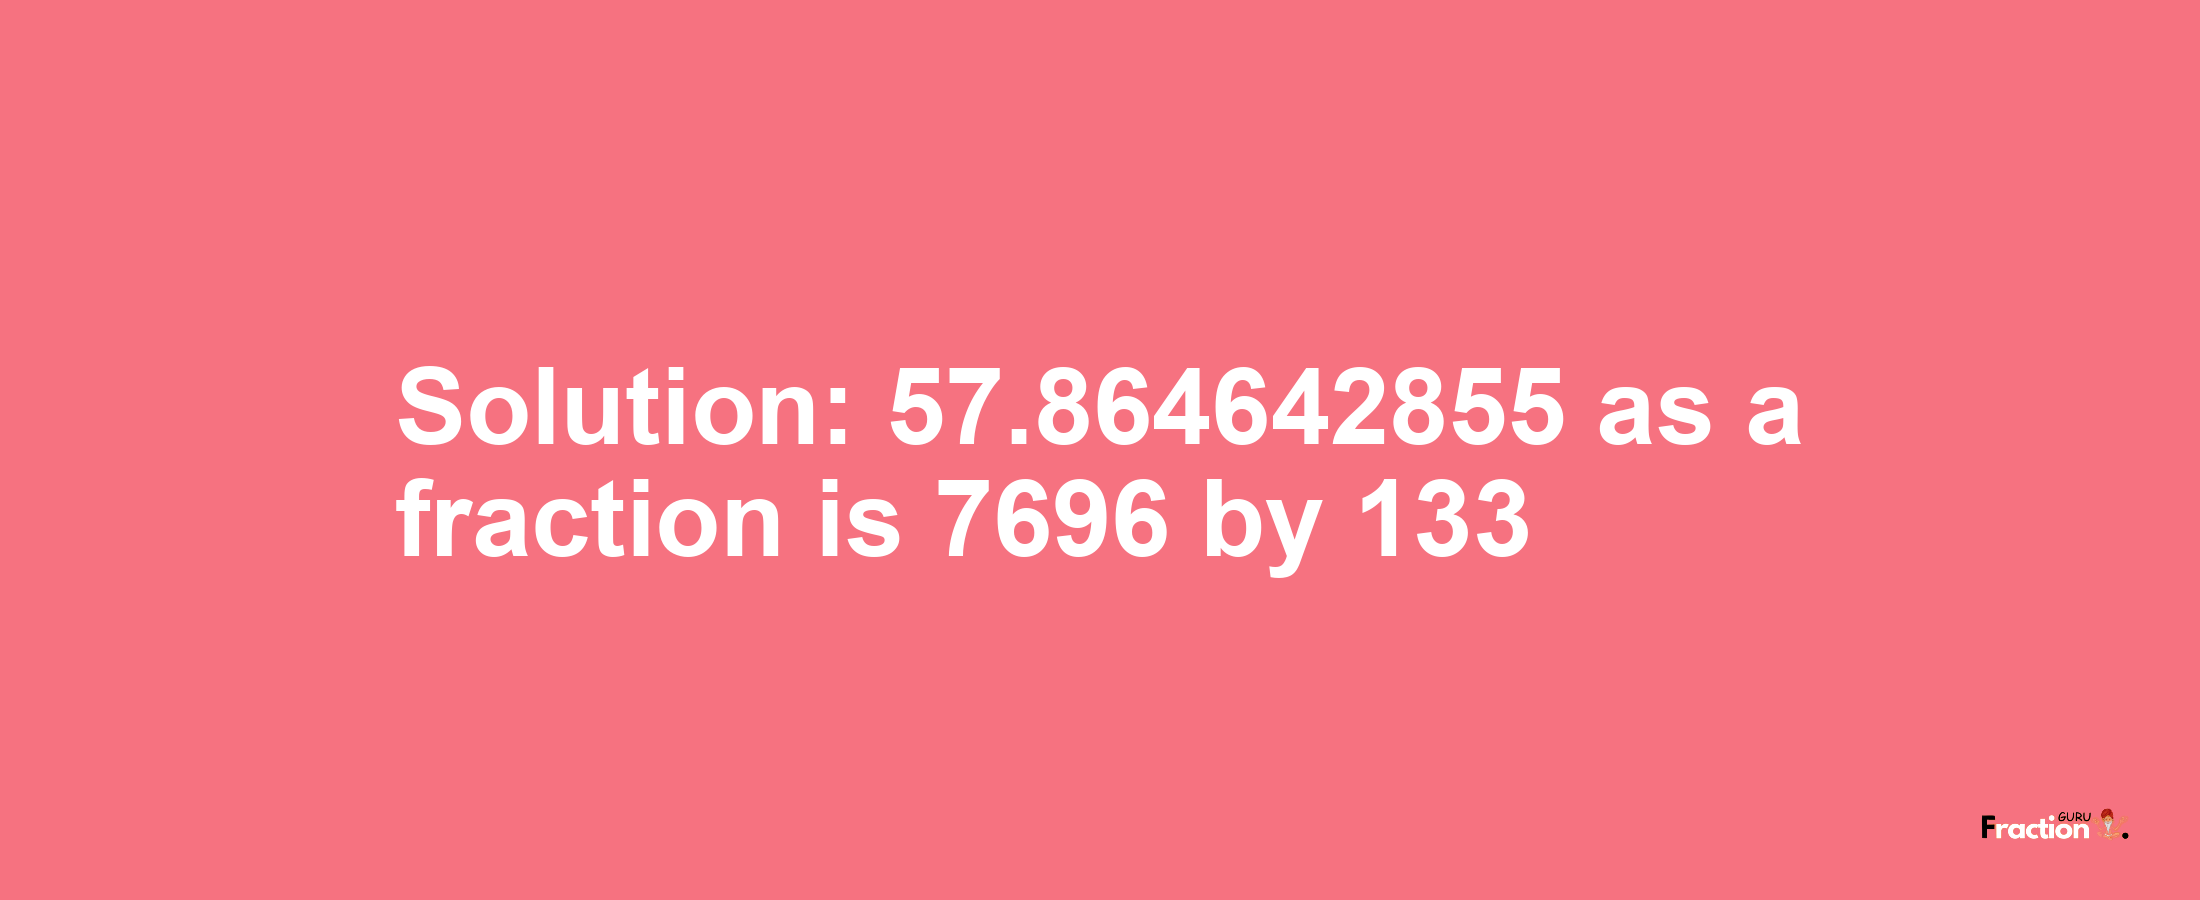 Solution:57.864642855 as a fraction is 7696/133